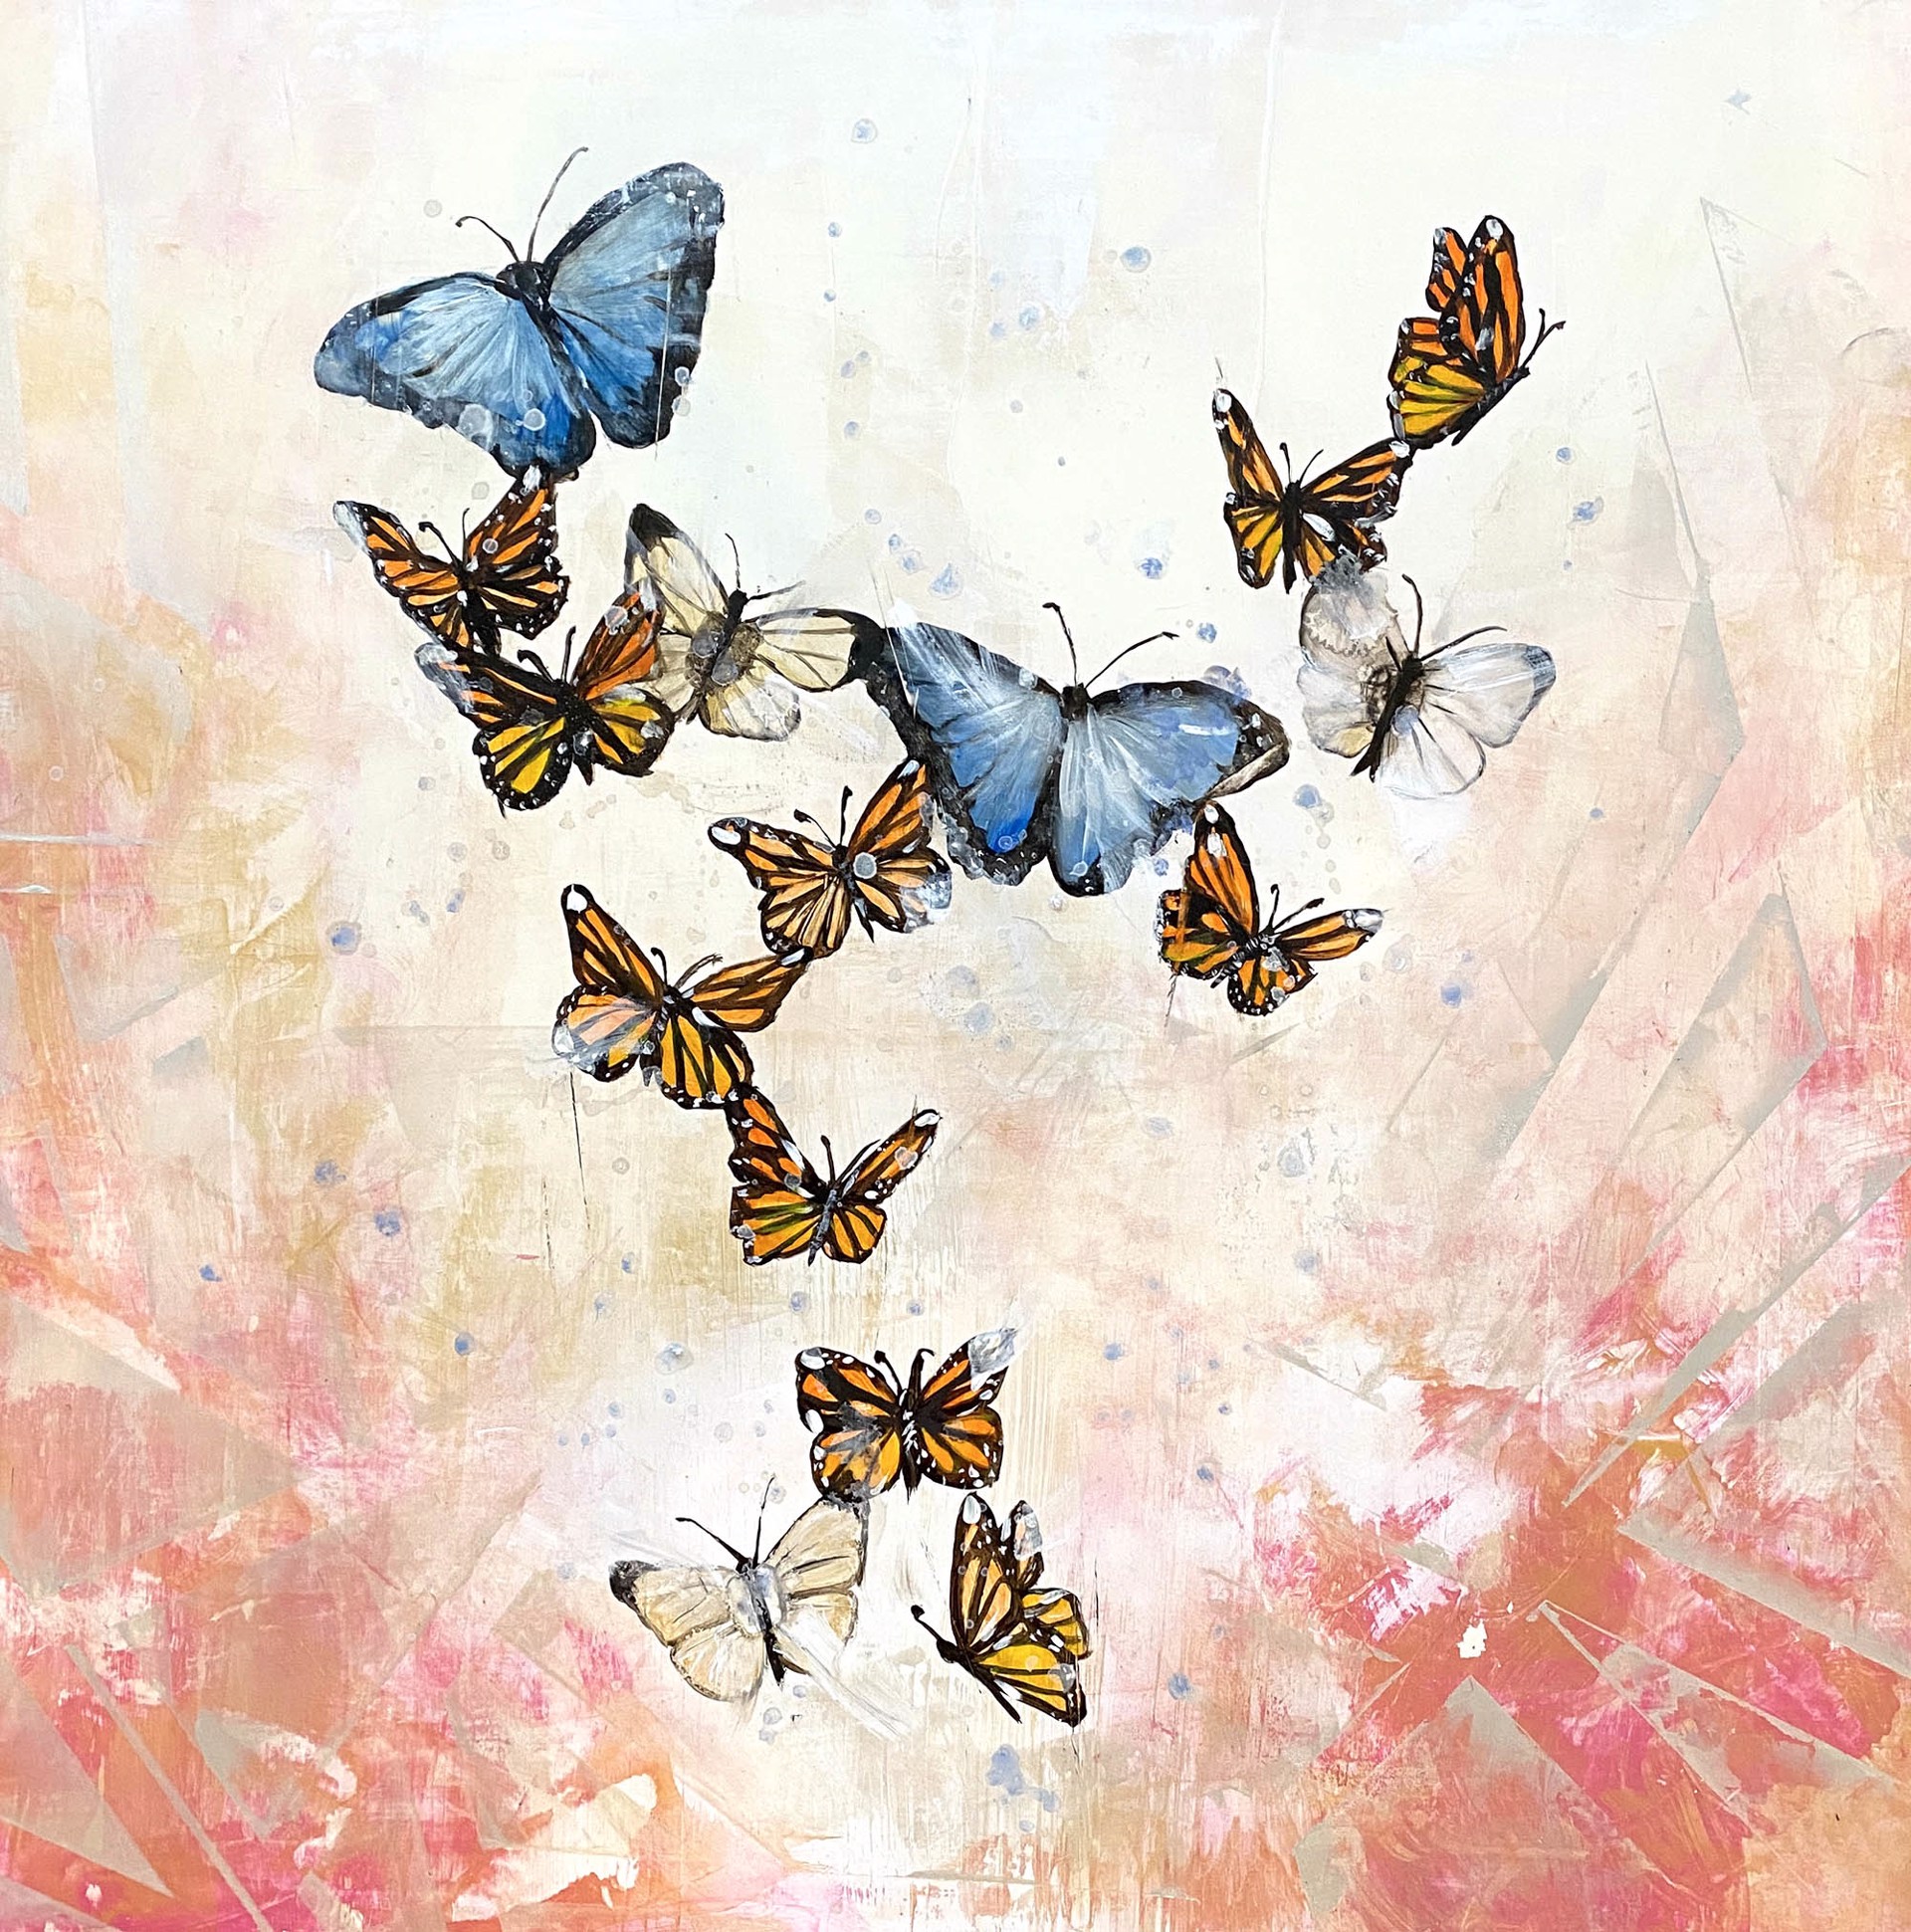 An Oil Painting Of Multiple Colors Of Butterflies In Flight On An Abstract Pink And Cream Colored Background, By Jenna Von Benedikt